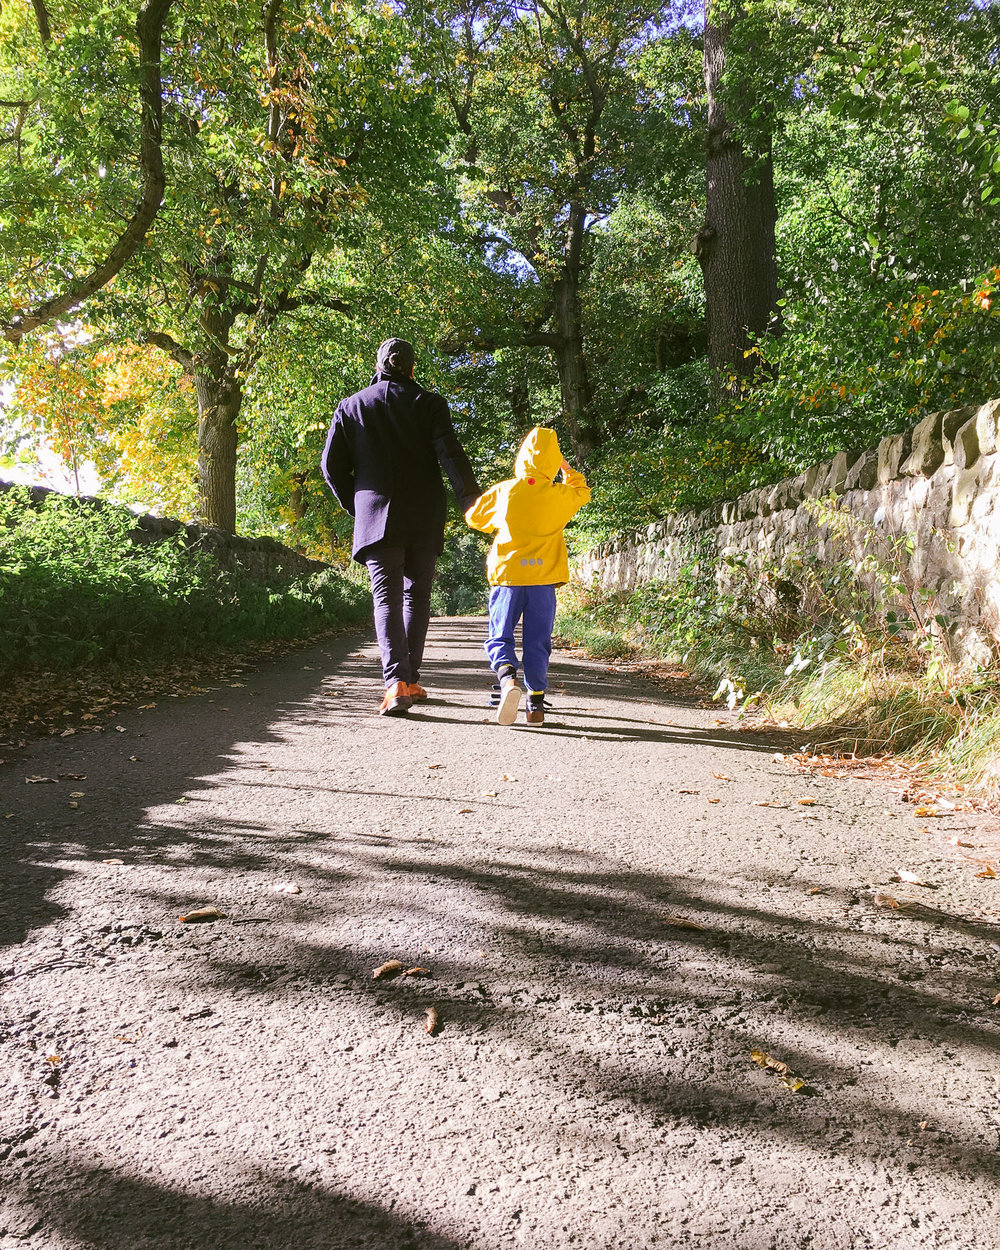 Costorphine hill is an easy climb for families